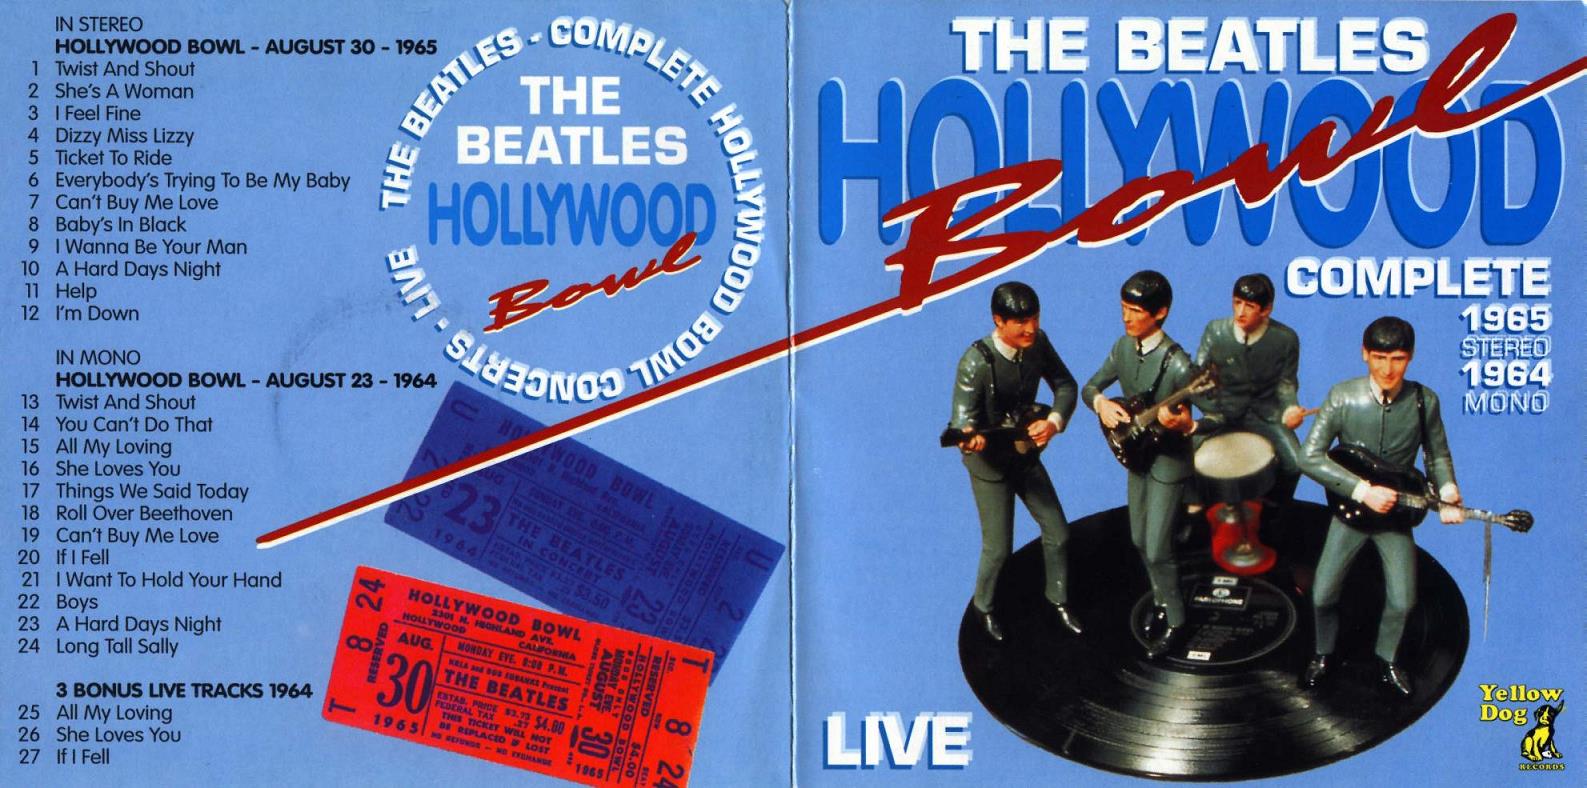 1965-08-30 - Hollywood Bowl complete (front)